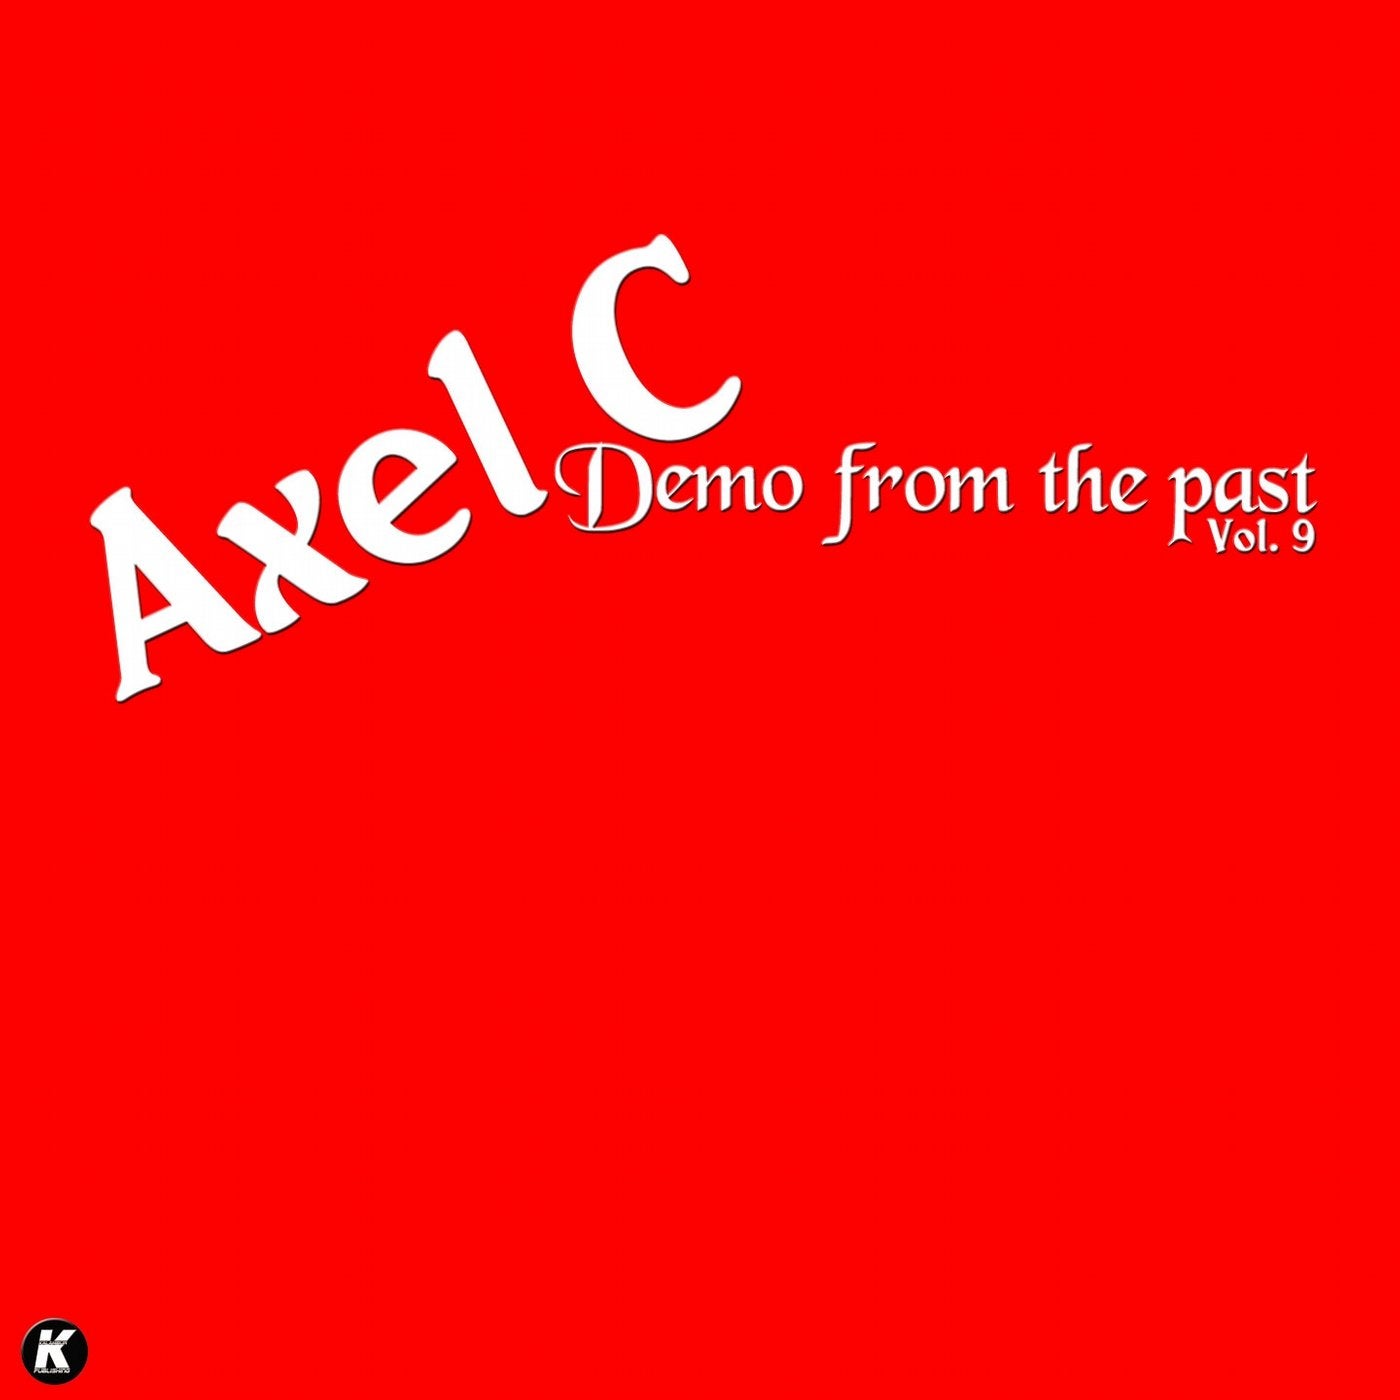 DEMO FROM THE PAST VOL 9